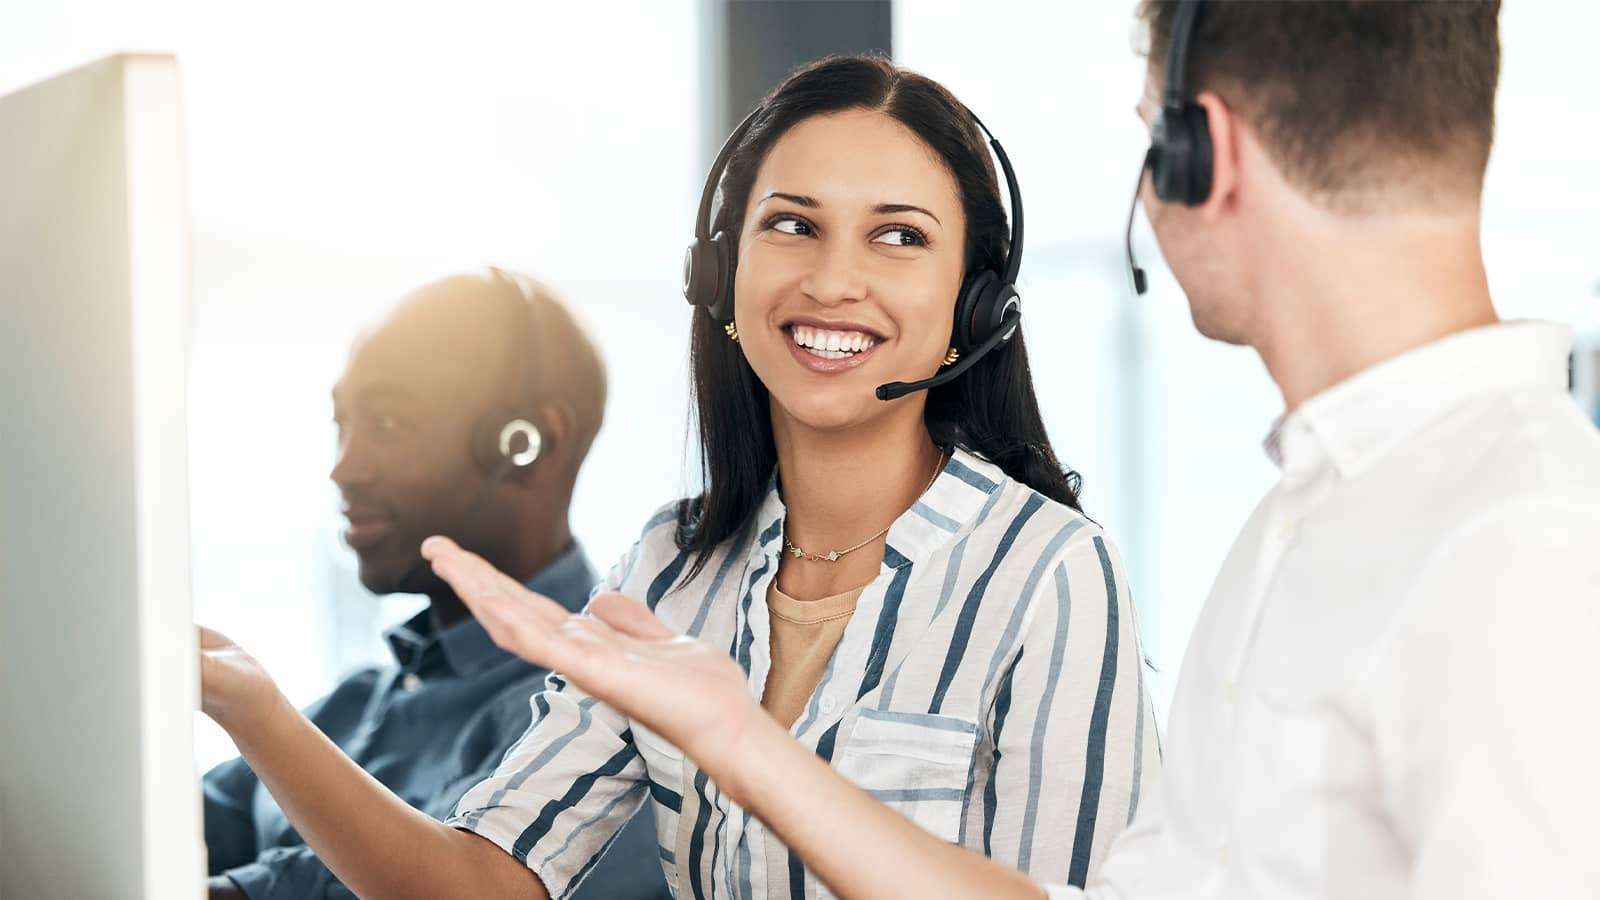 person wearing headset talking to co-workers